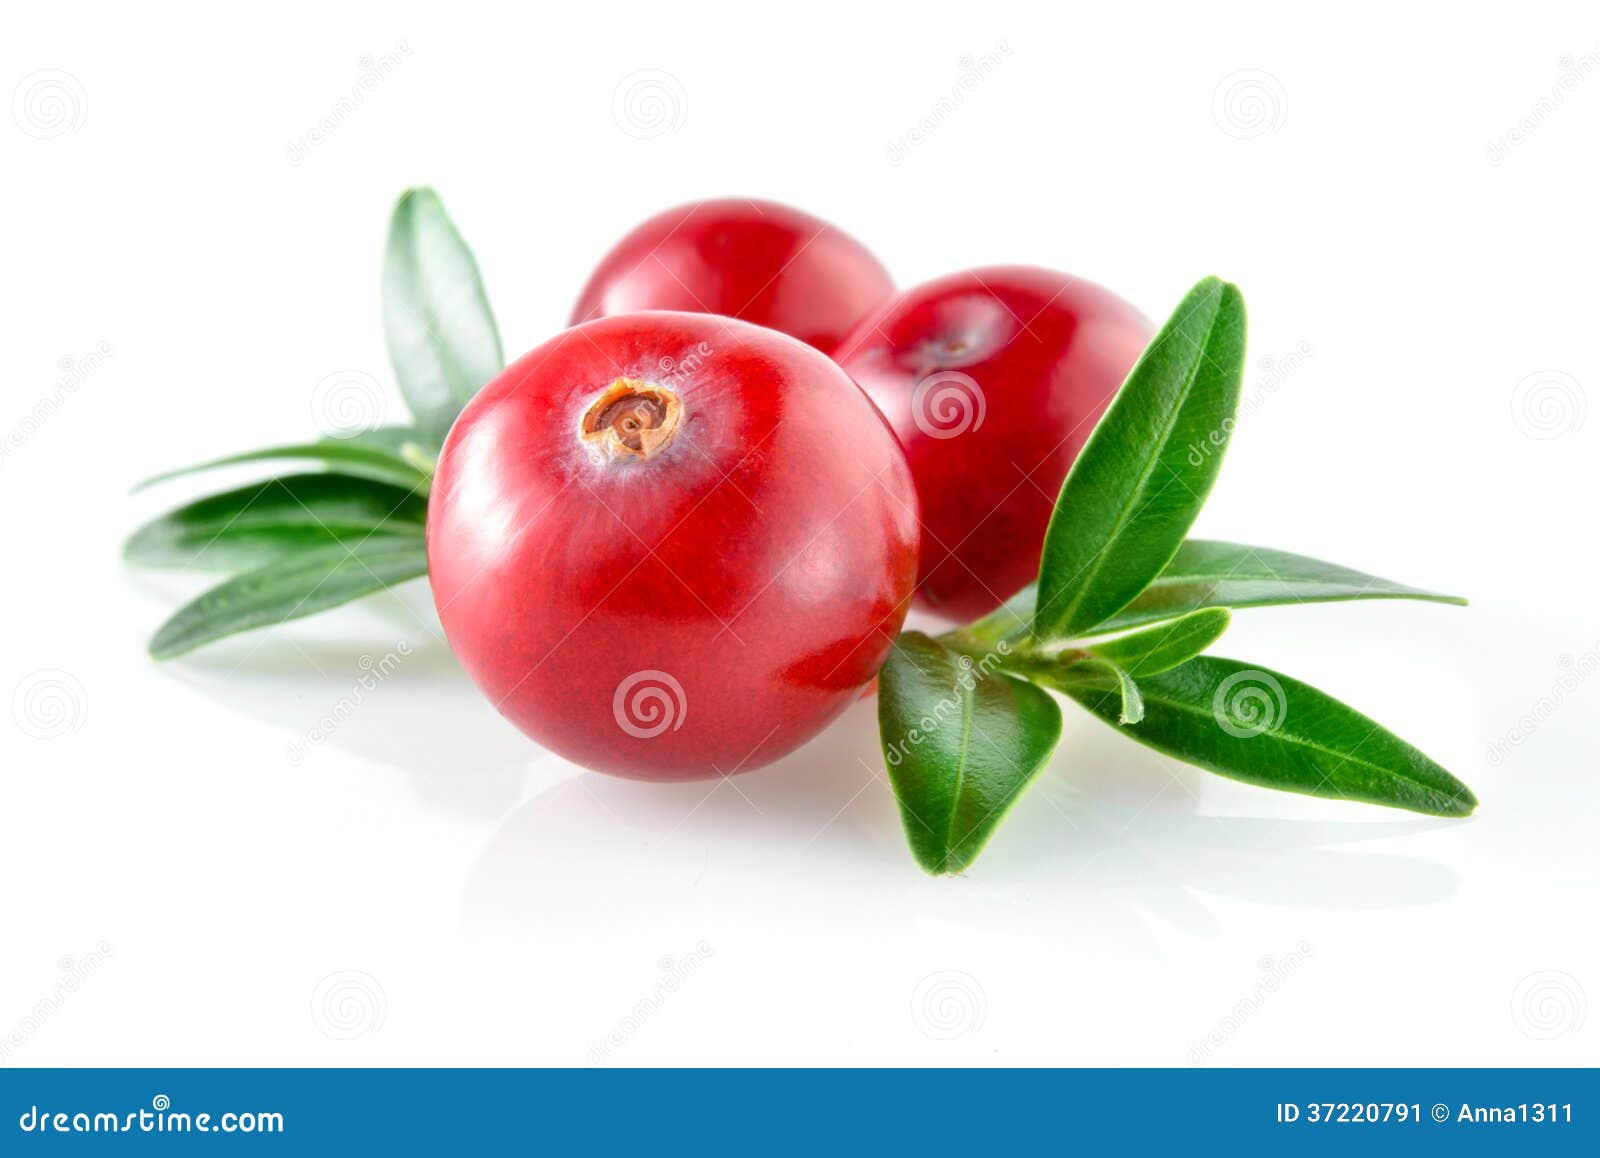 cranberry with leaf on white background